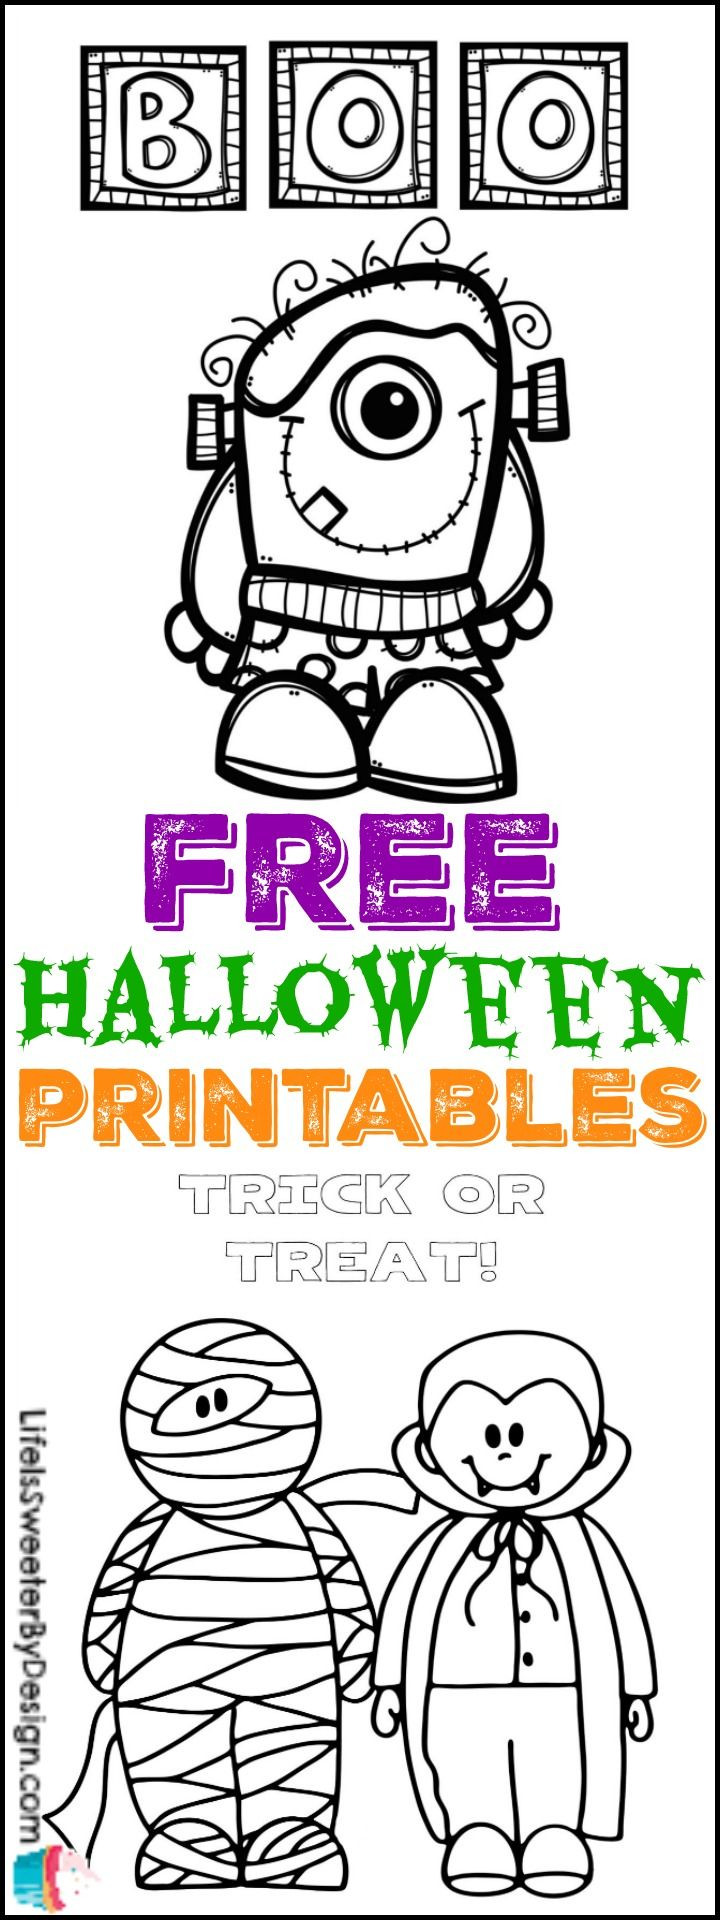 Halloween Activities Pages
 Get some FREE Halloween printables to keep your children